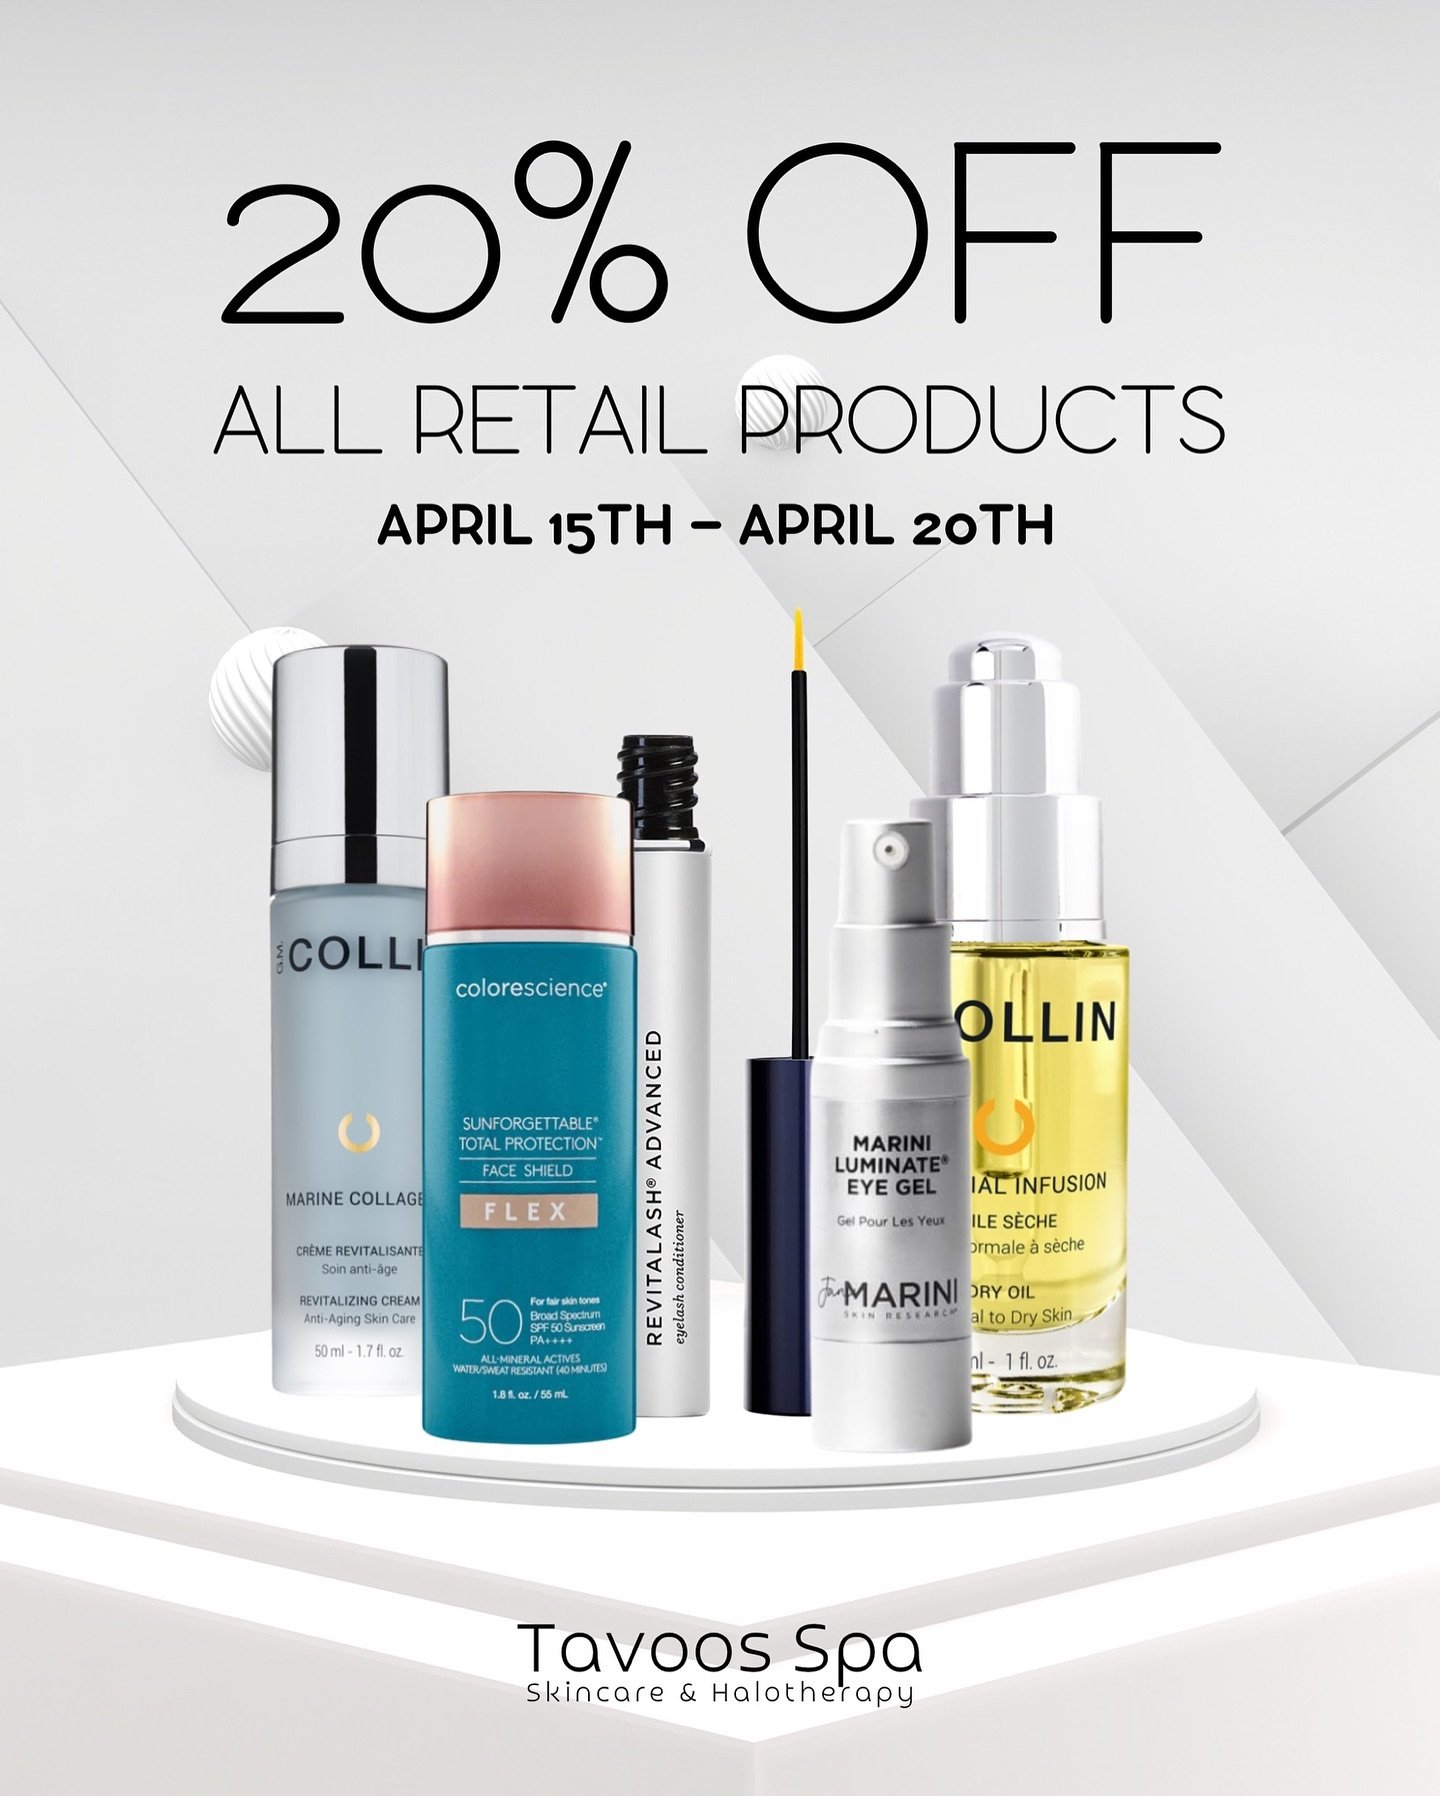 BIG SPRING SALE ✨🤍 

From April 15th-April 20th get 20% OFF all retail products! This sale only happens once a year so don&rsquo;t miss out!

Stock up on all of your favorite skincare products &amp; save 🙌 Stop by the spa during the sale and check 